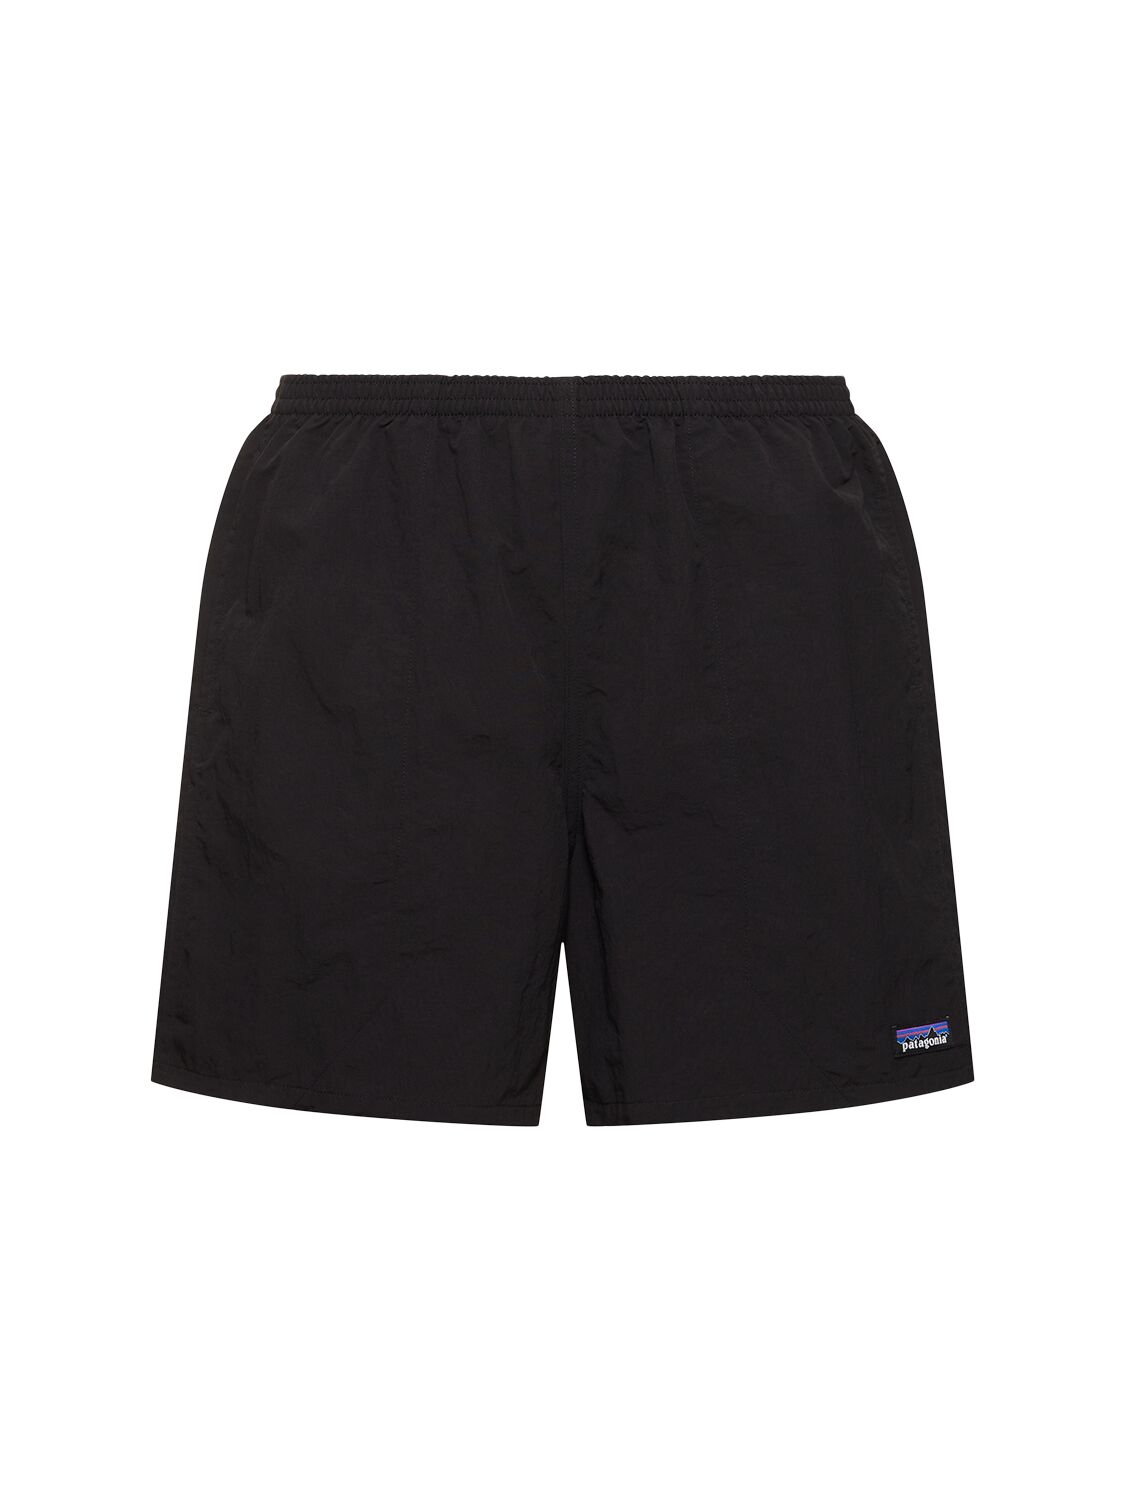 Image of Baggies 5" Recycled Tech Swim Shorts